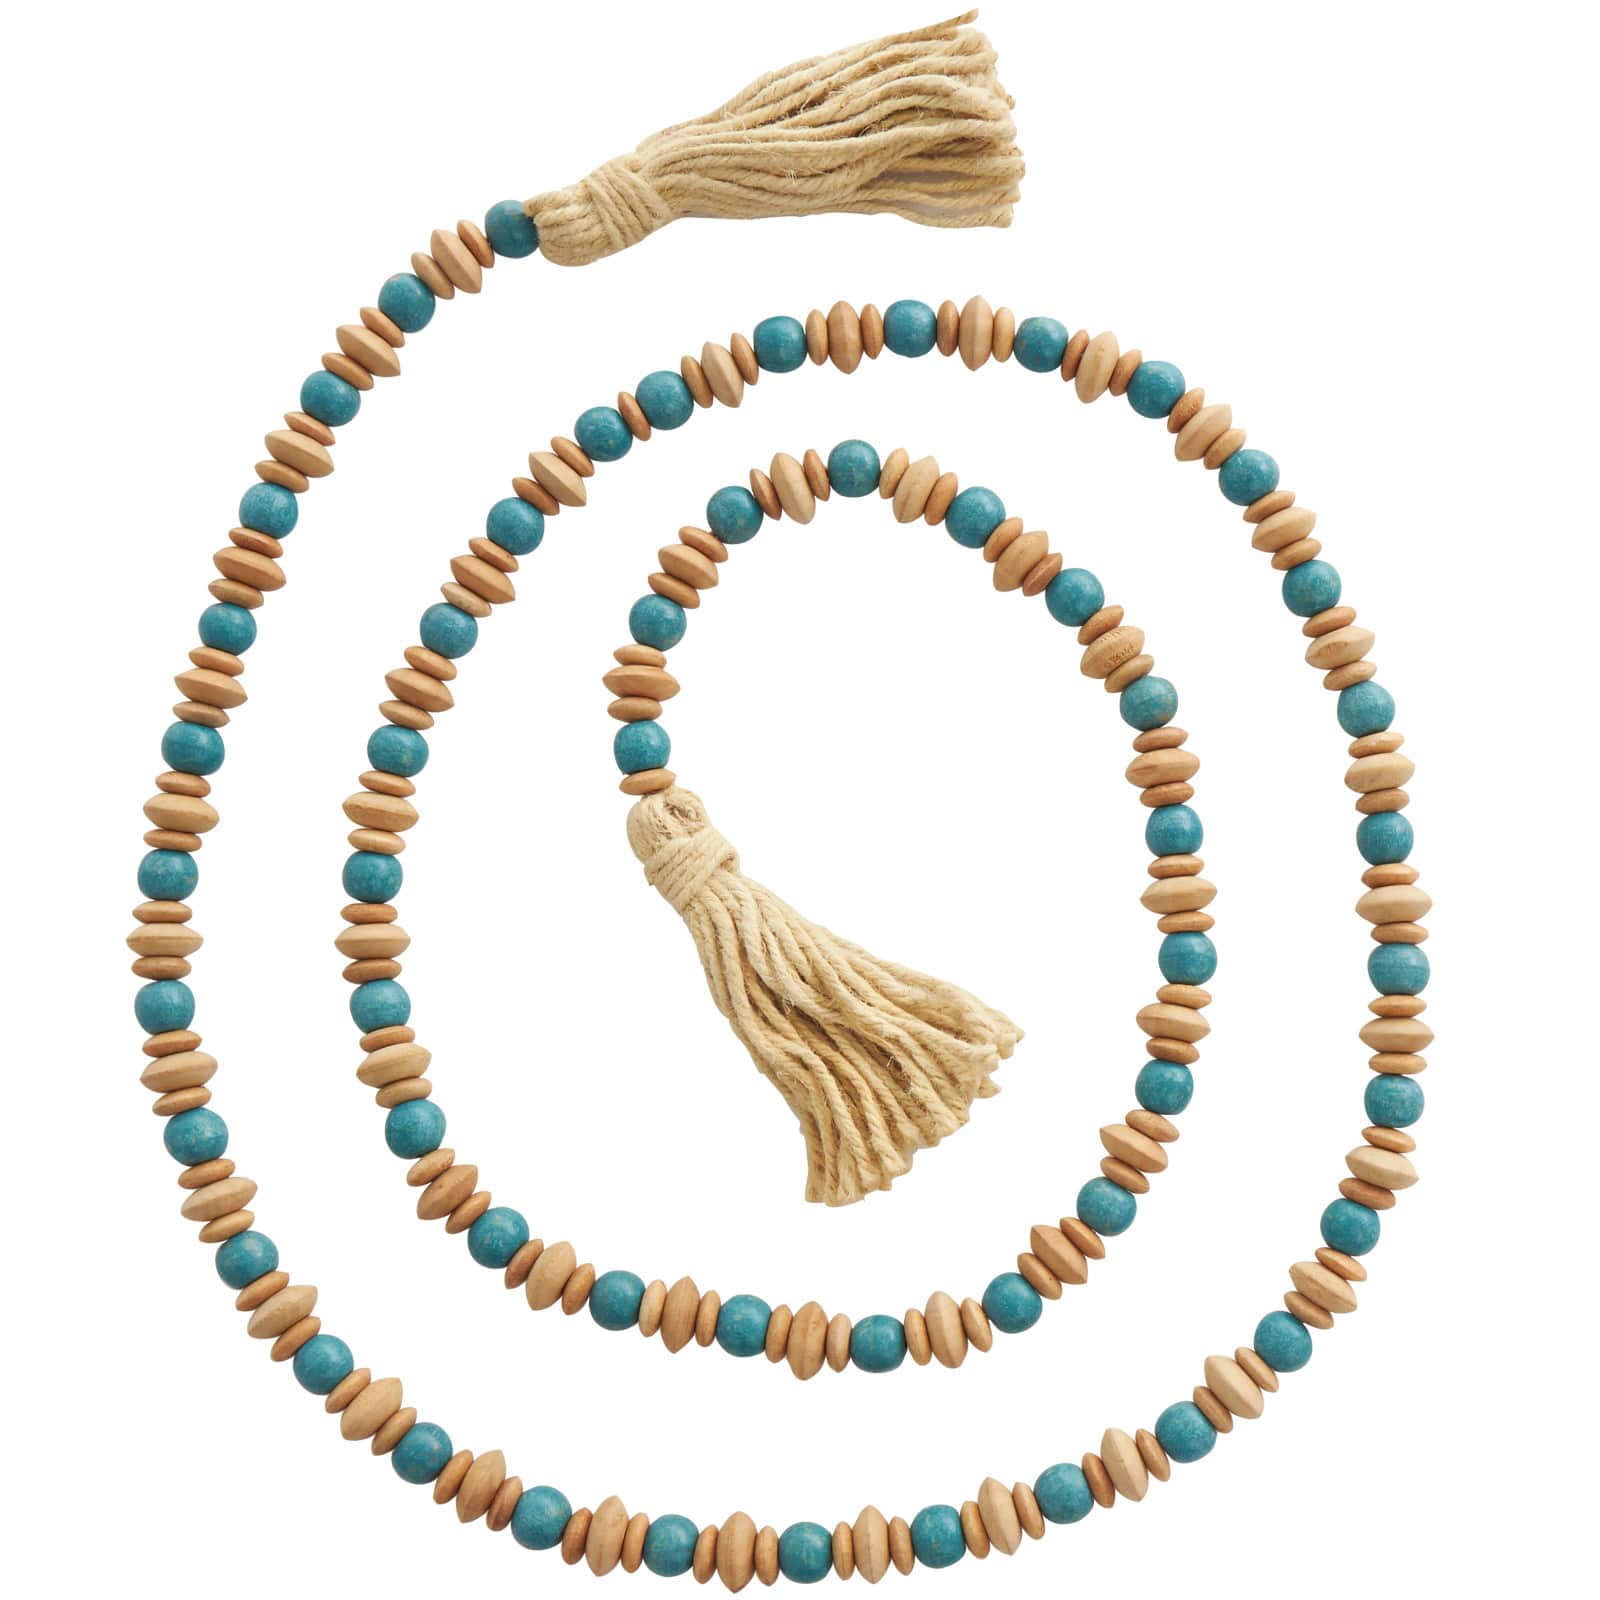 7ft. Teal Mango Wood Handmade Round Long Carved Beaded Garland with Tassel